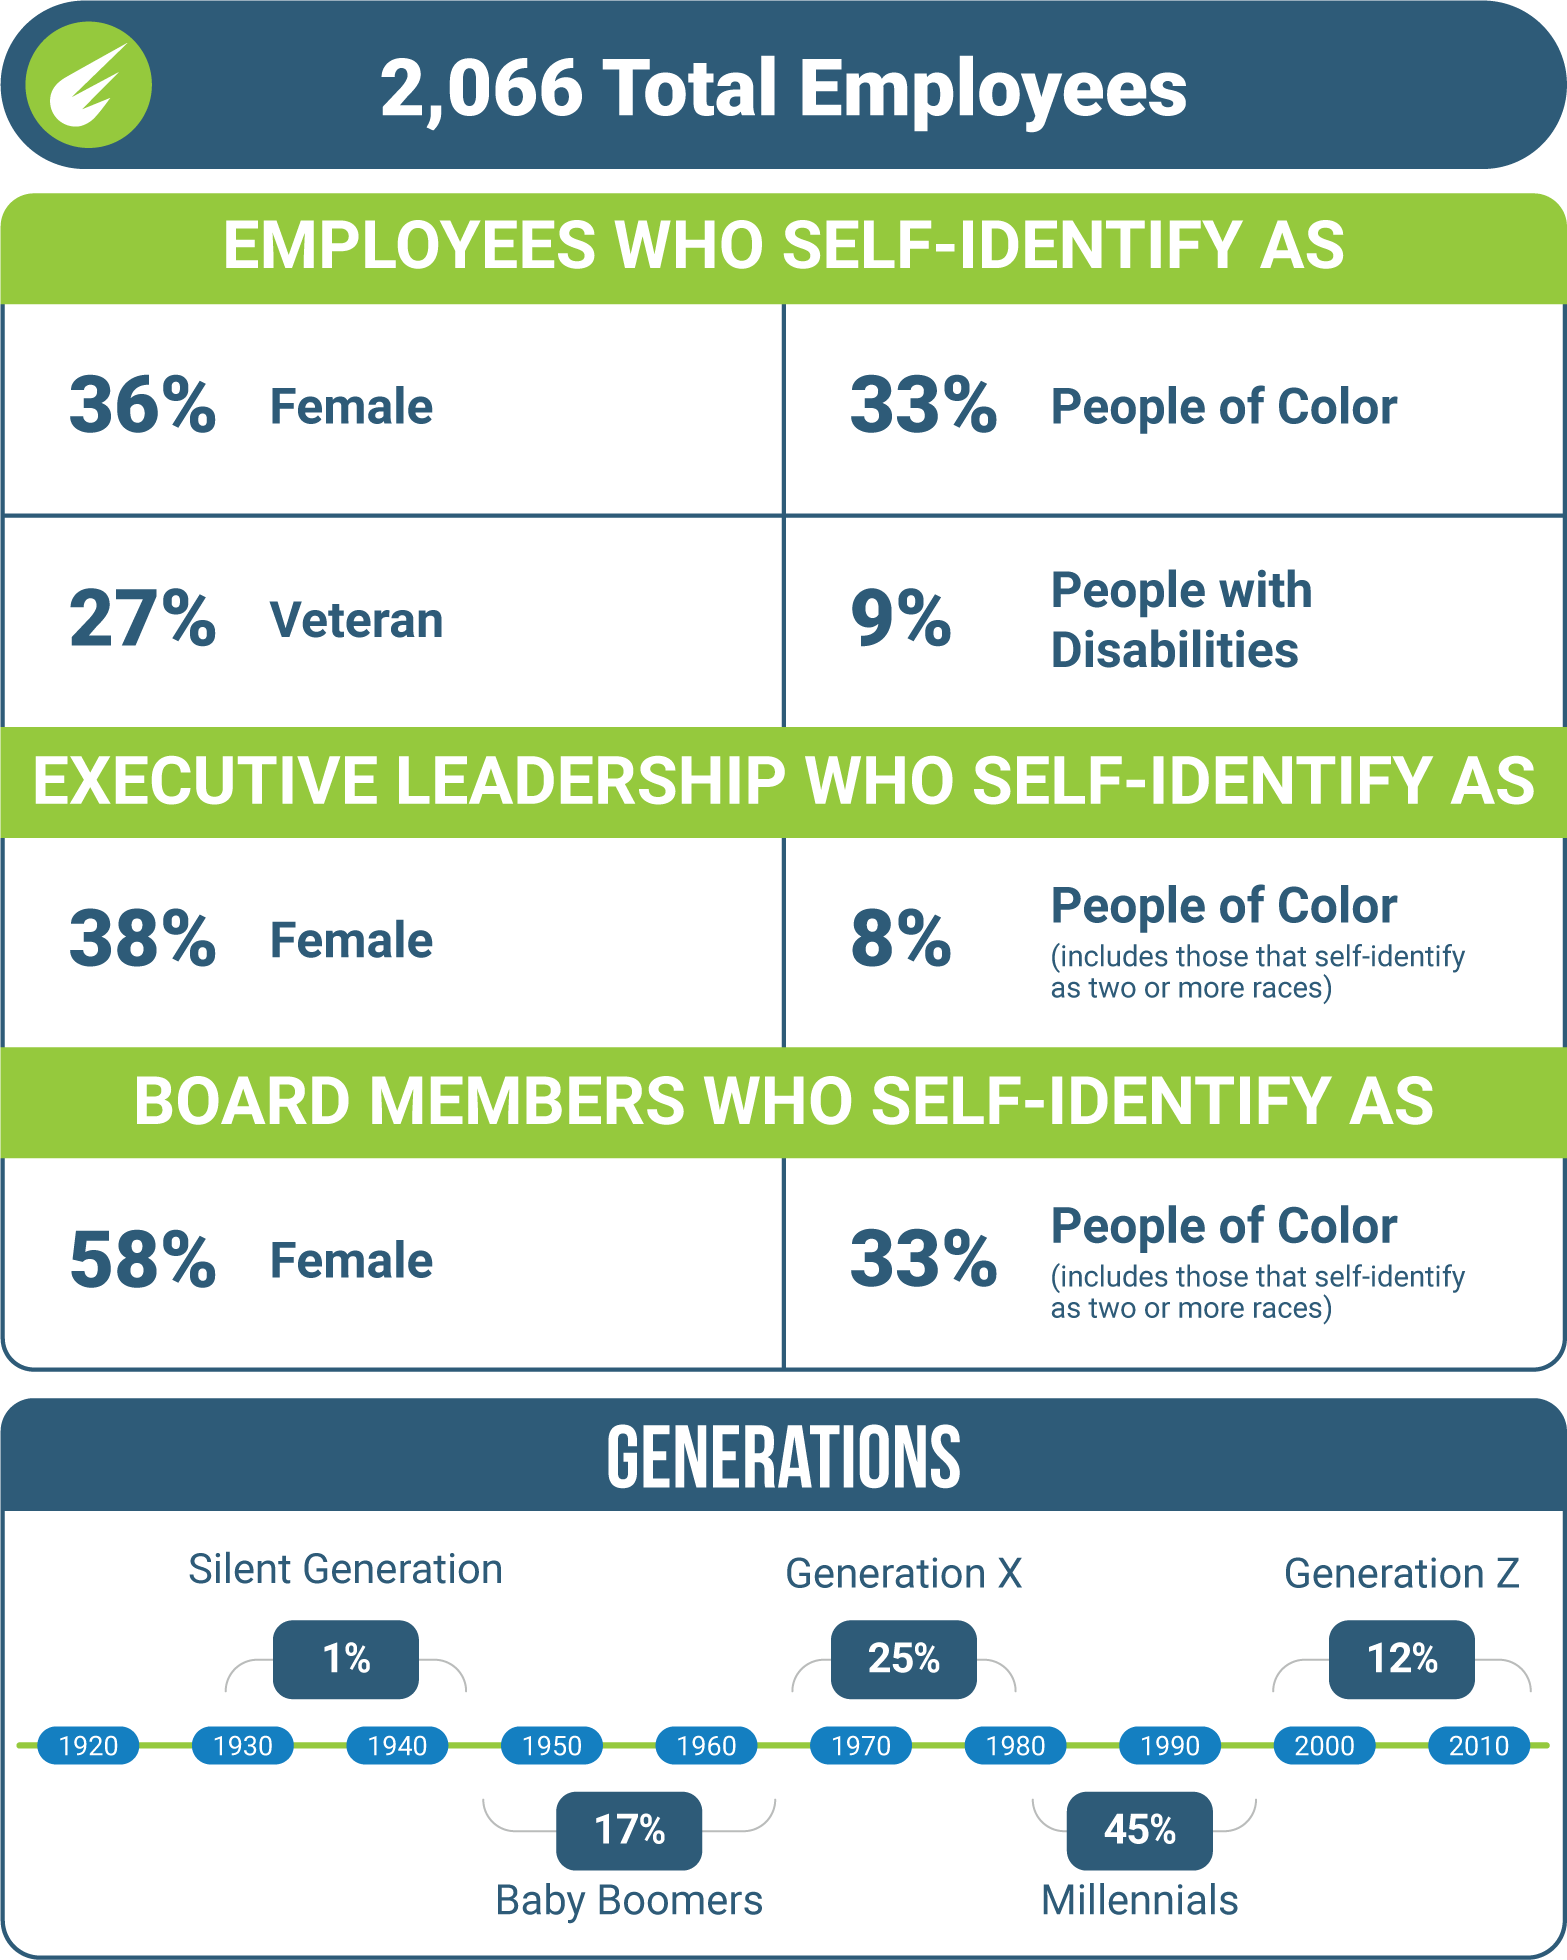 2066 total employees; employees who self-identify as: female 36%, people of color 33%, veteran 27%, people with disabilities 9%; executive leadership who self-identify as: female 38%, people of color (includes those that self-identify as two or more races) 8%; board members who self-identify as: female 58%, people of color (includes those that self-identify as two or more races) 33%; generations: silent generation 1%, baby boomers 17%, gen x 25%, millennials 45%, gen z 12%